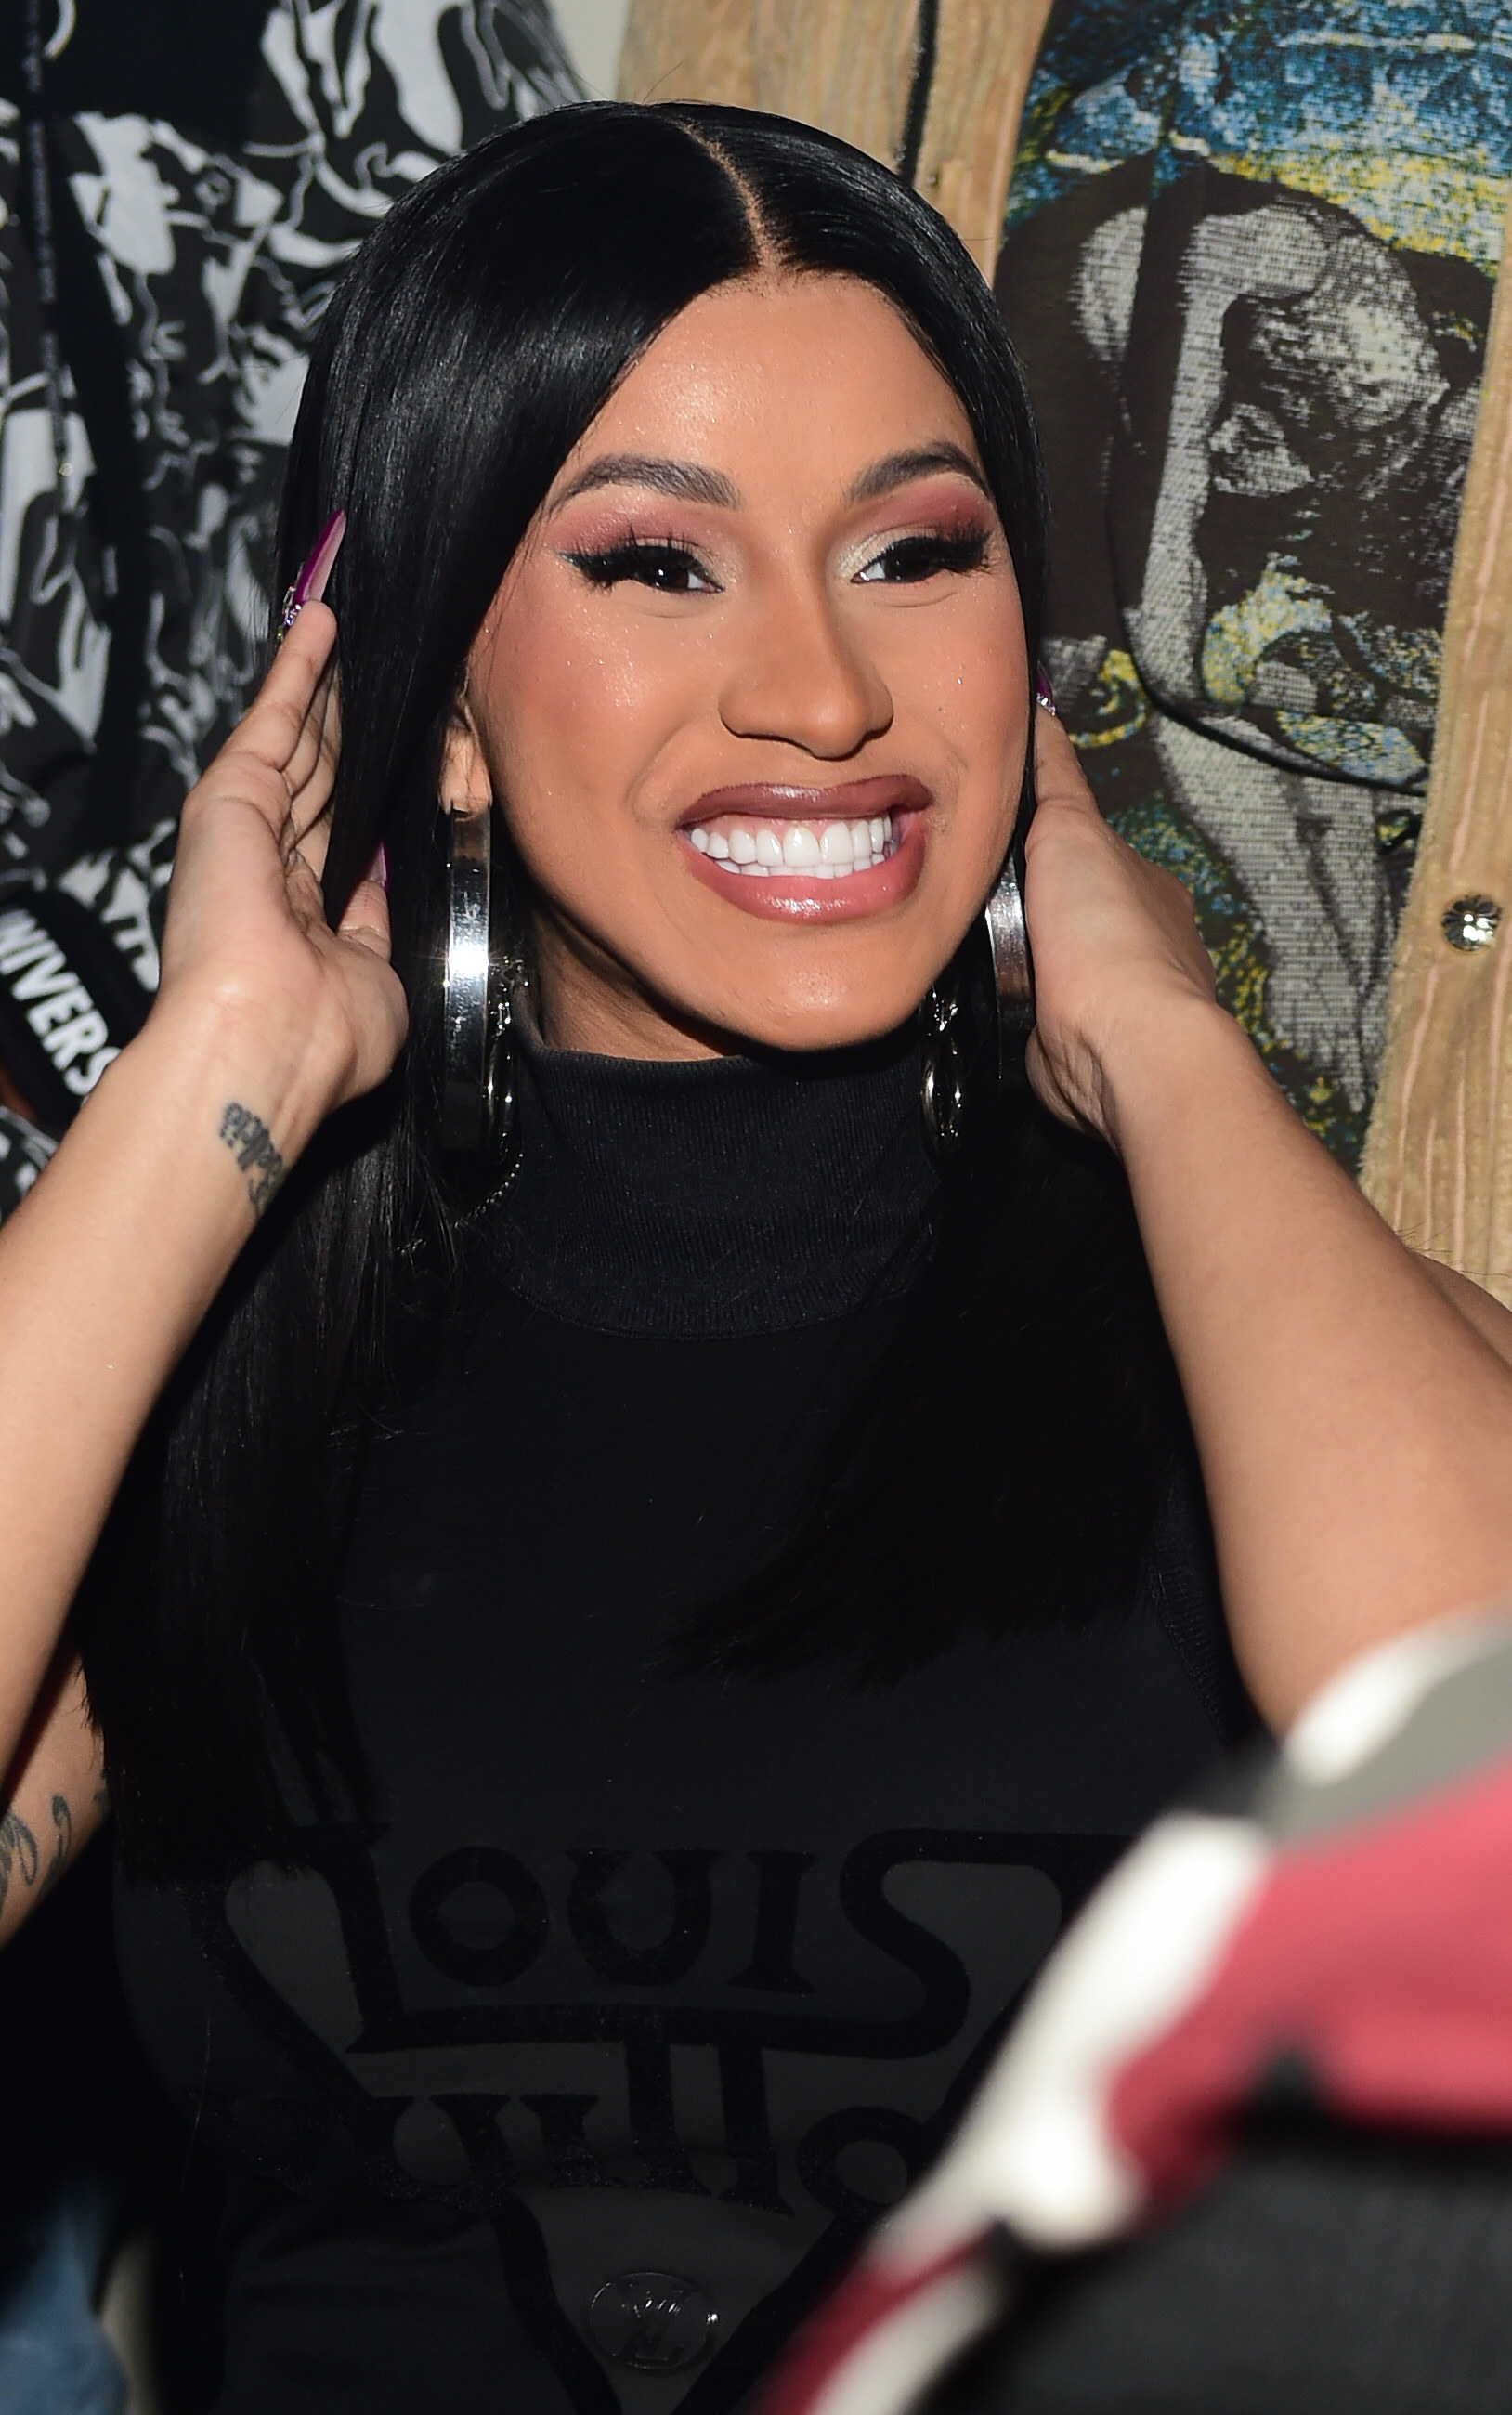 Cardi B is pictured smiling at an event in Atlanta